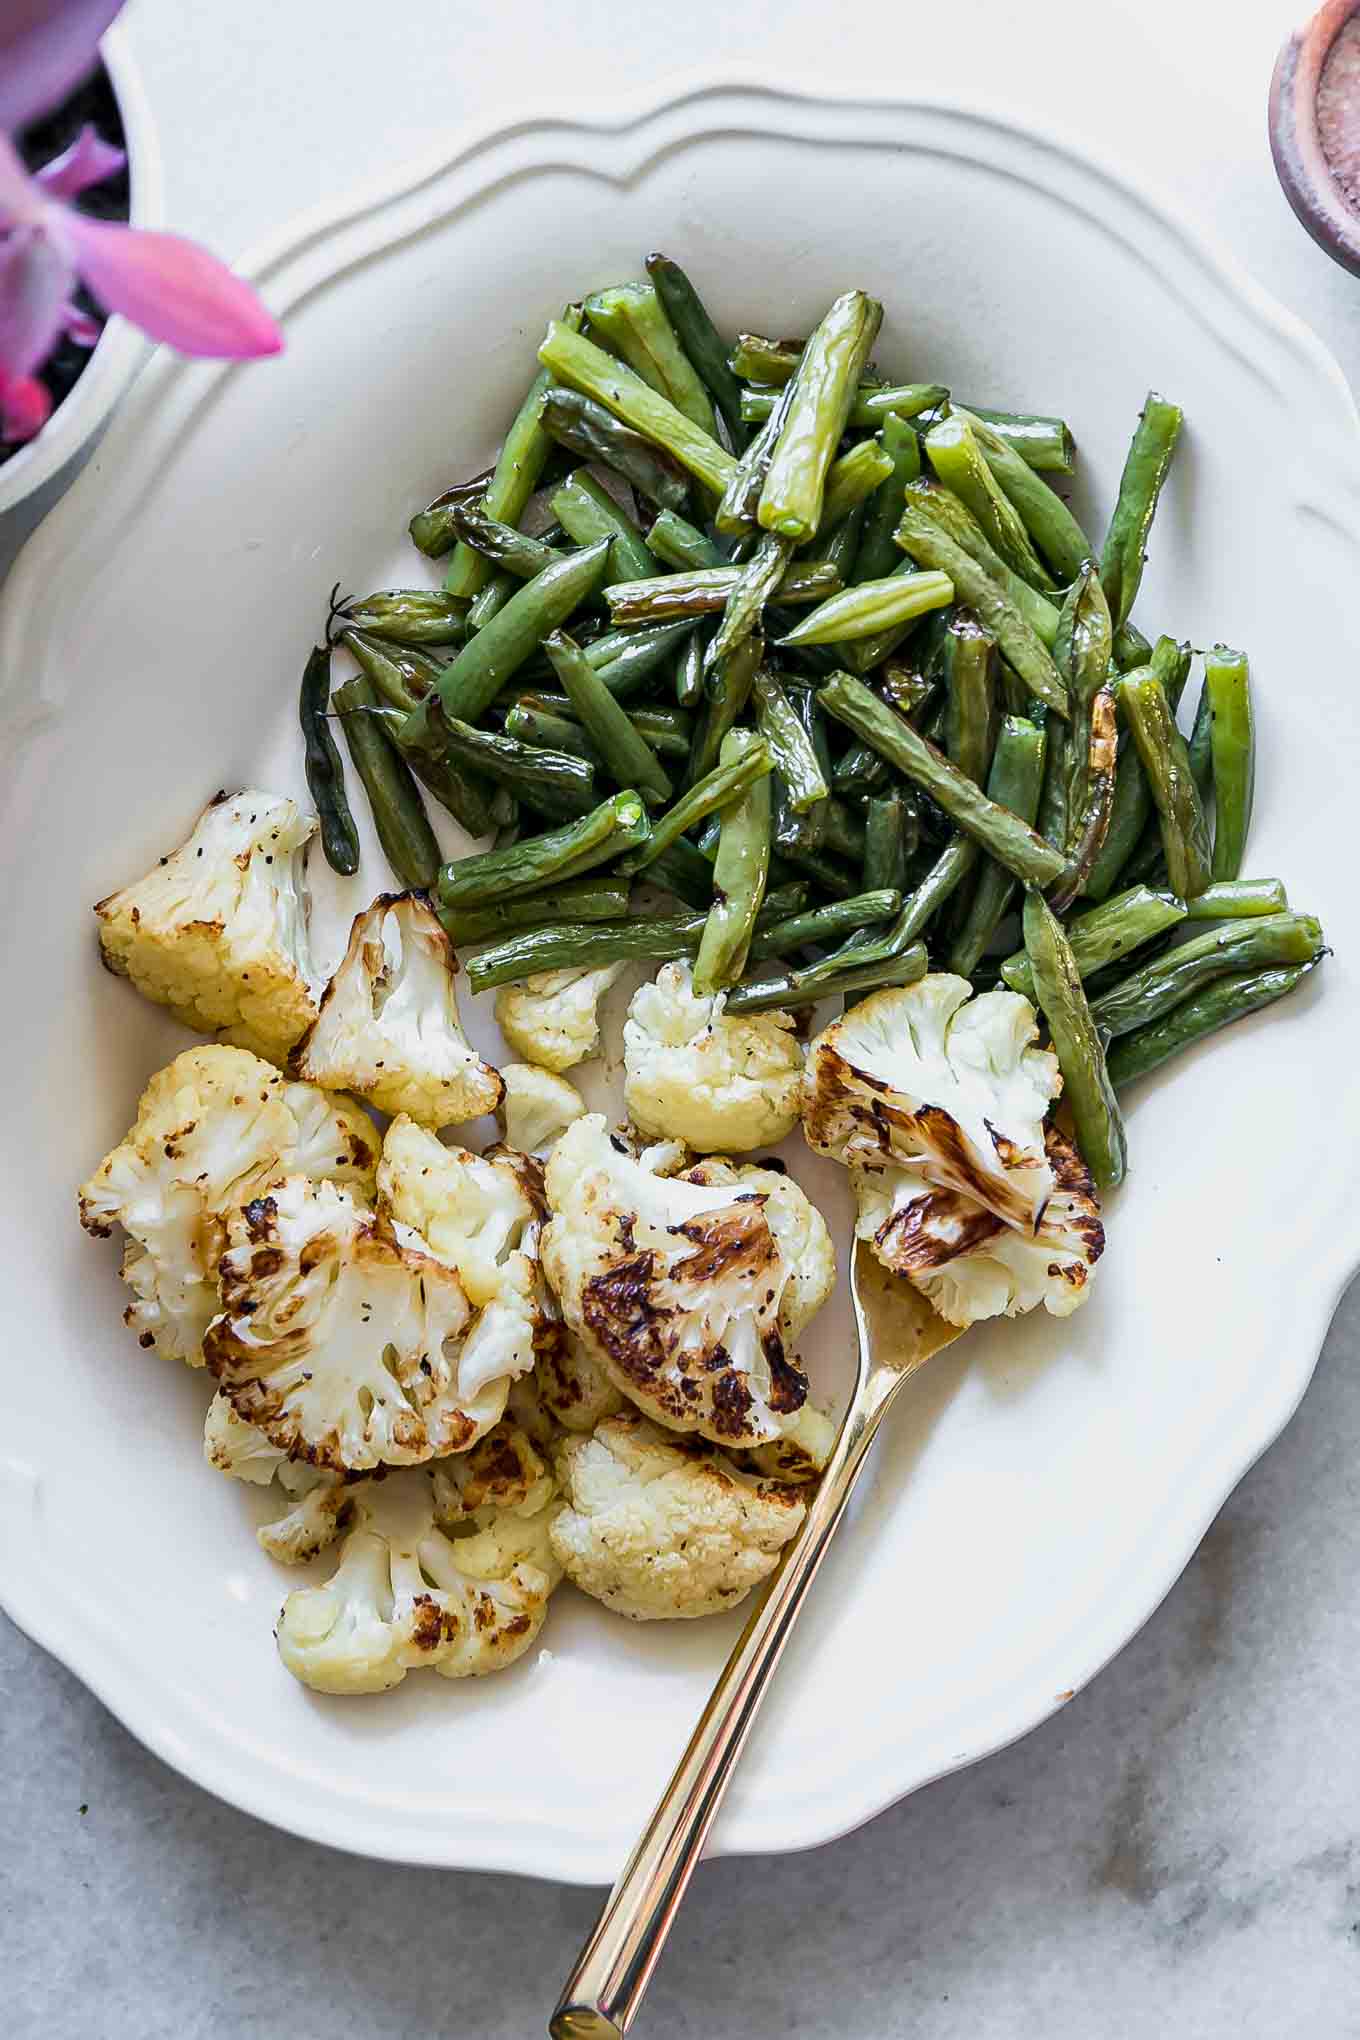 Roasted Cauliflower and Green Beans